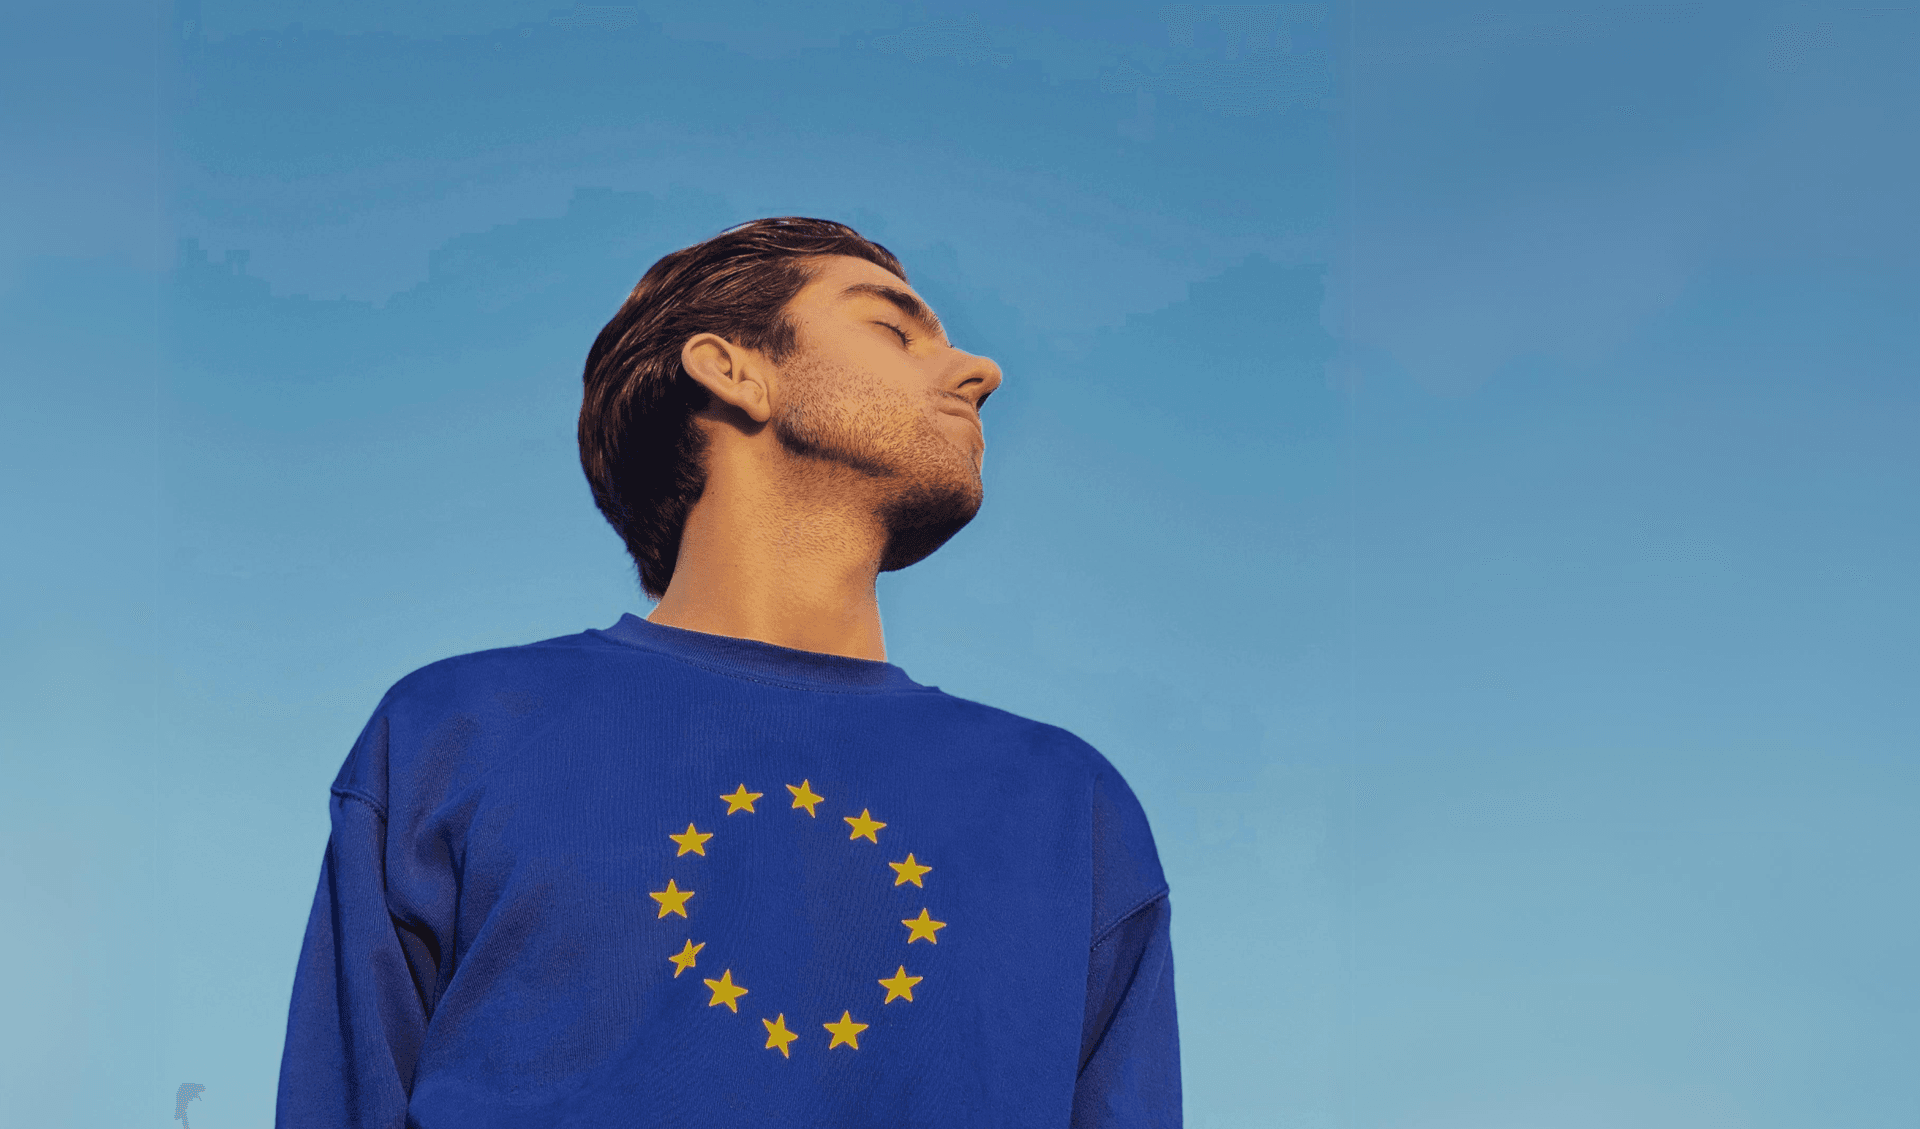 Person wearing EU pullover with their head turned to the sky